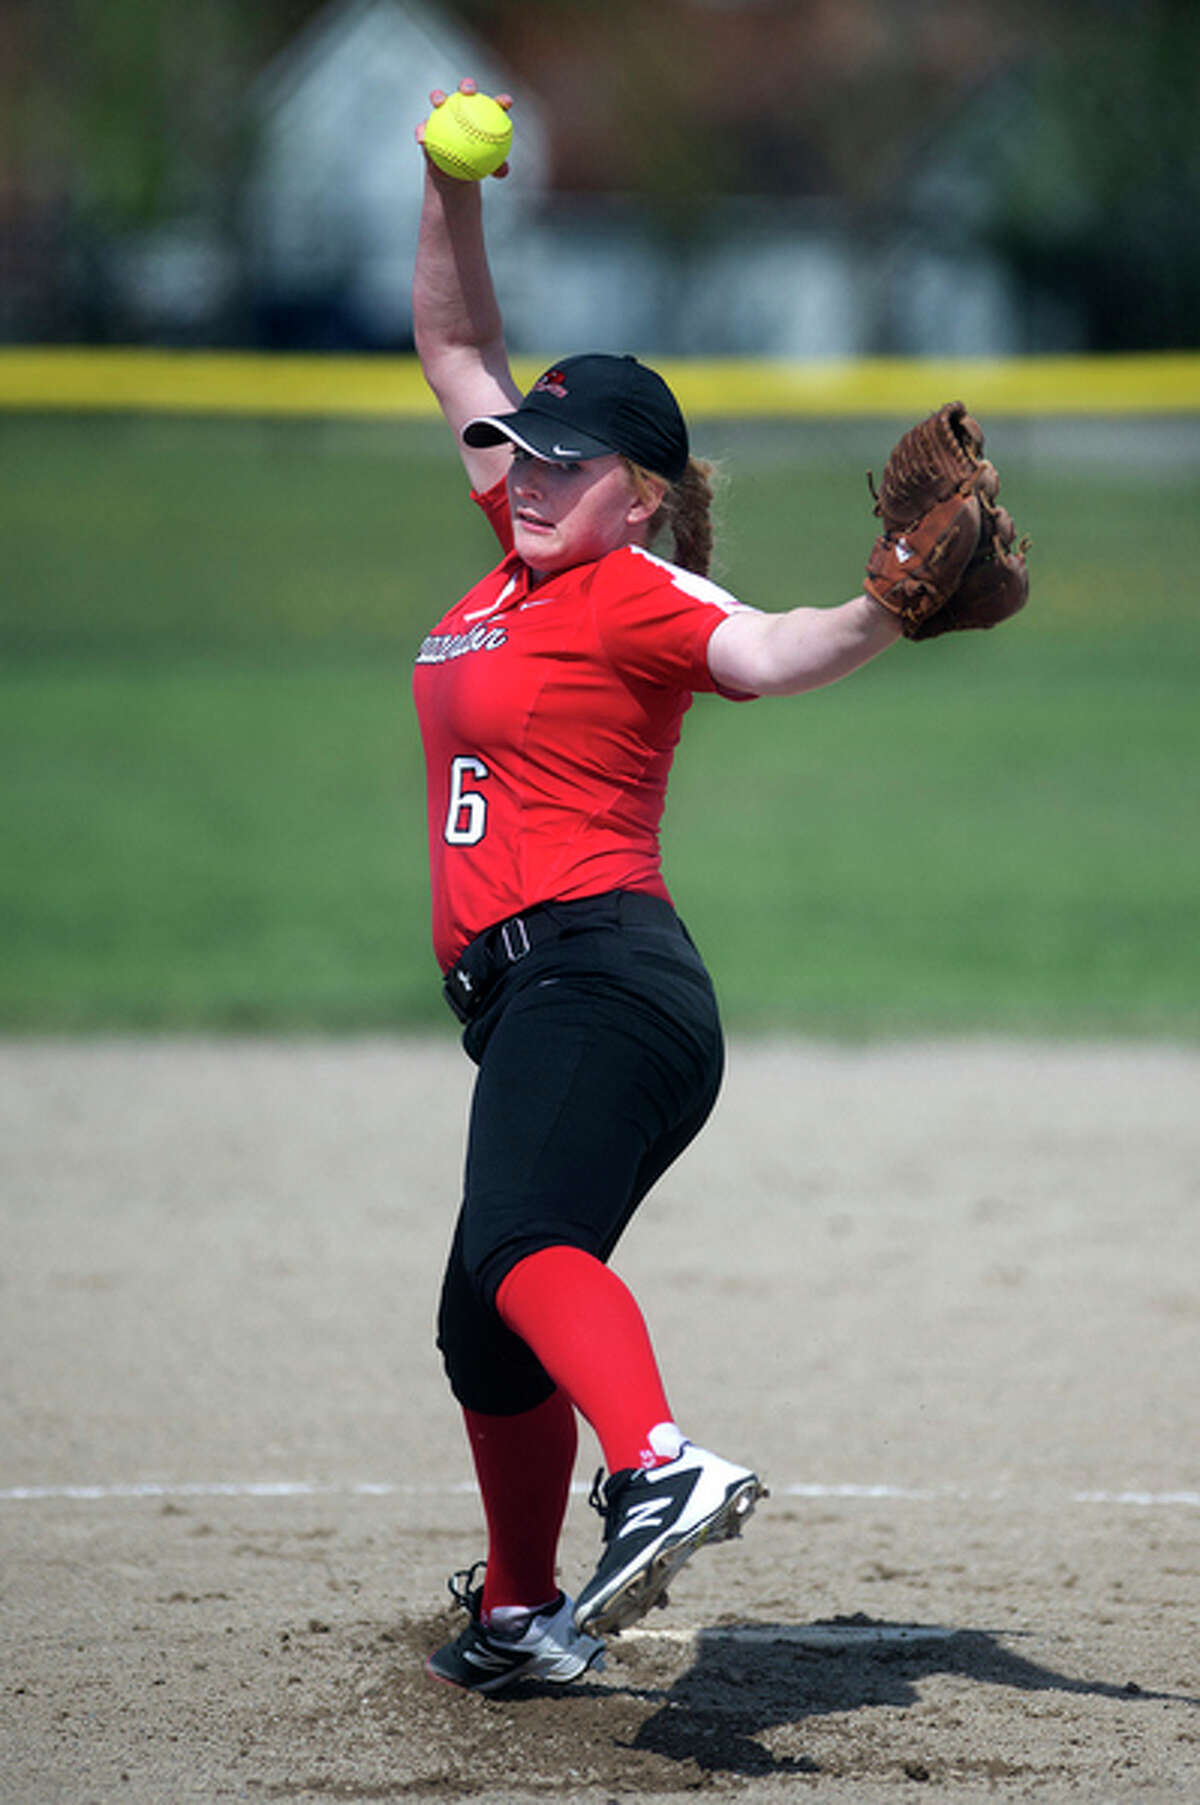 BRITTNEY LOHMILLER | blohmiller@mdn.net Beaverton's Faith Howe is 31-3 and has struck out 357 batters.